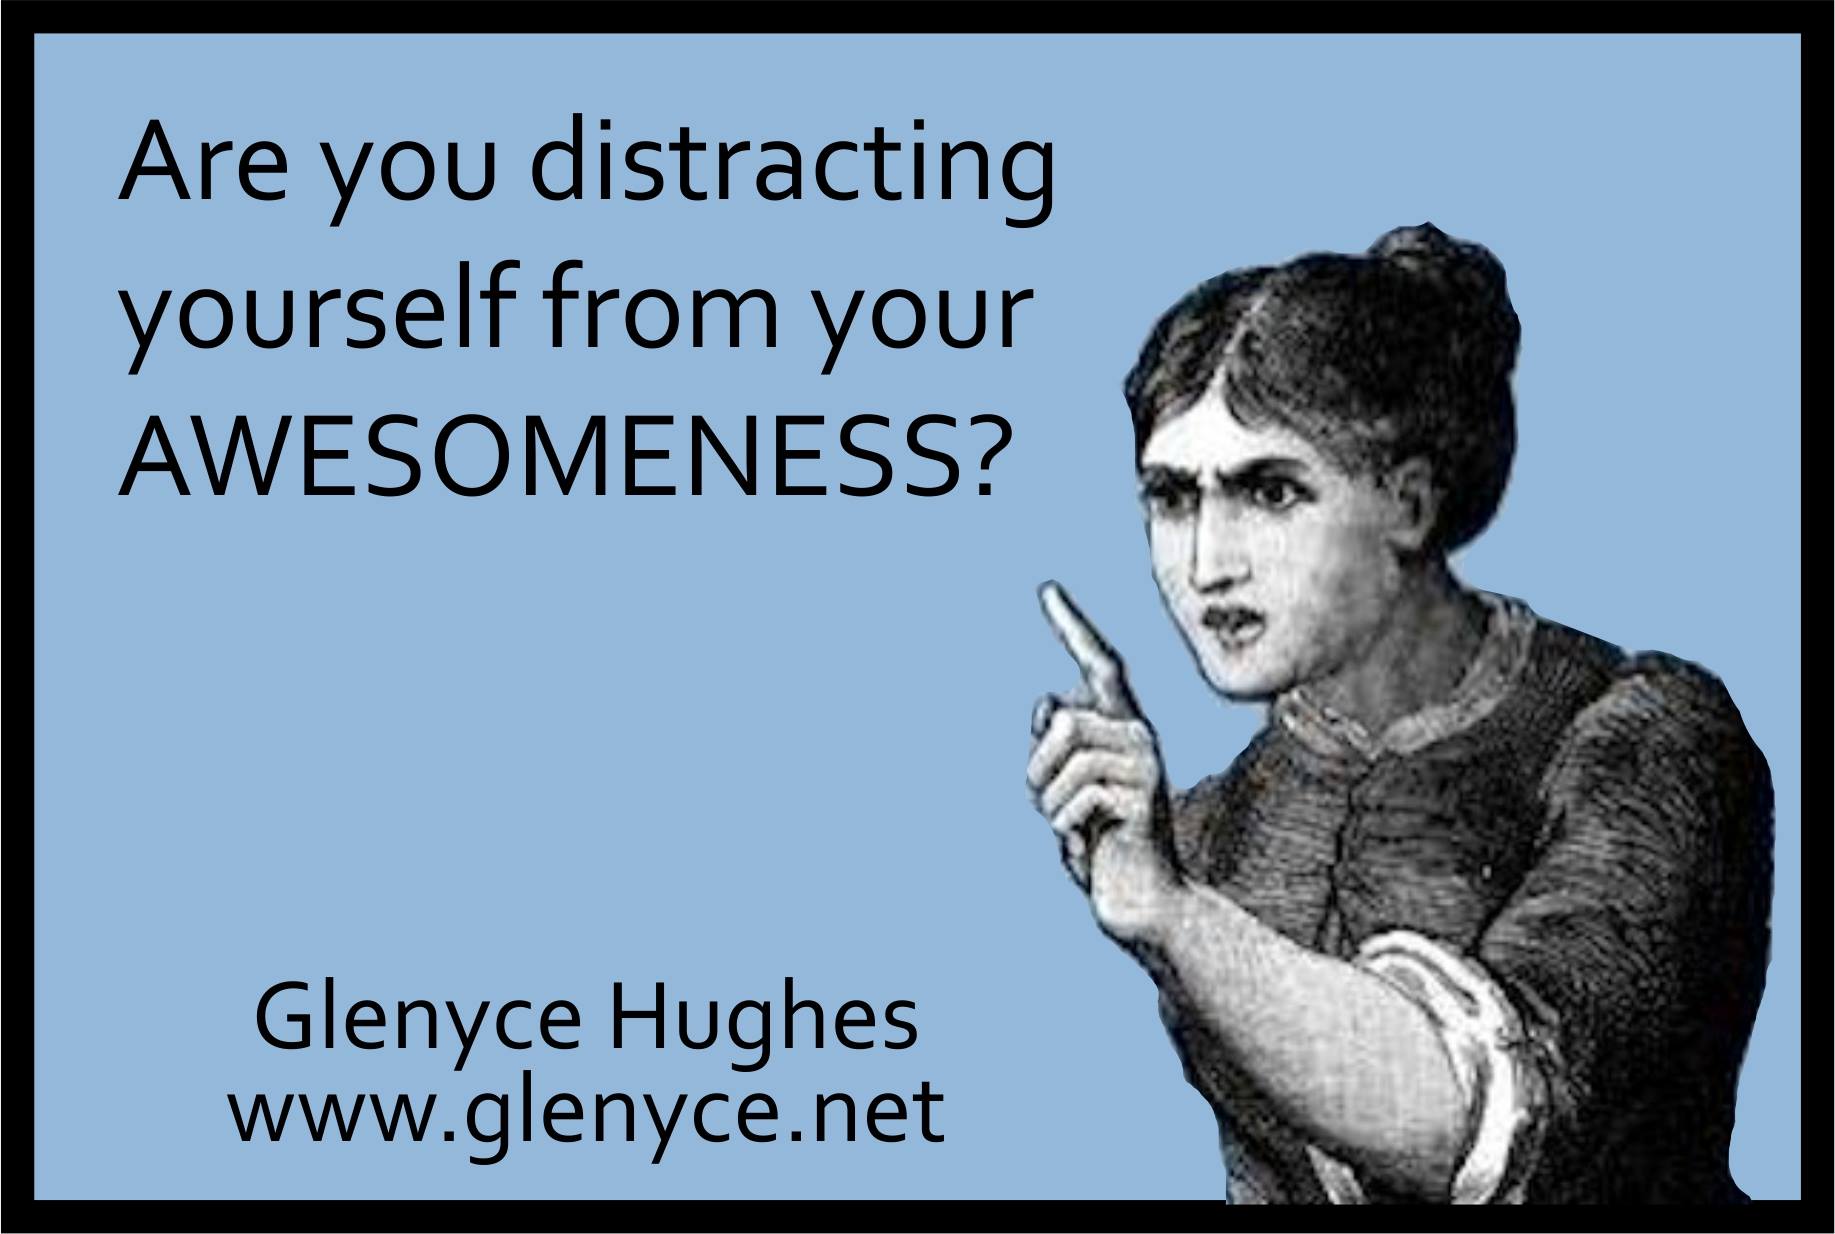 Stop Distracting Yourself from Your AWEsomeness